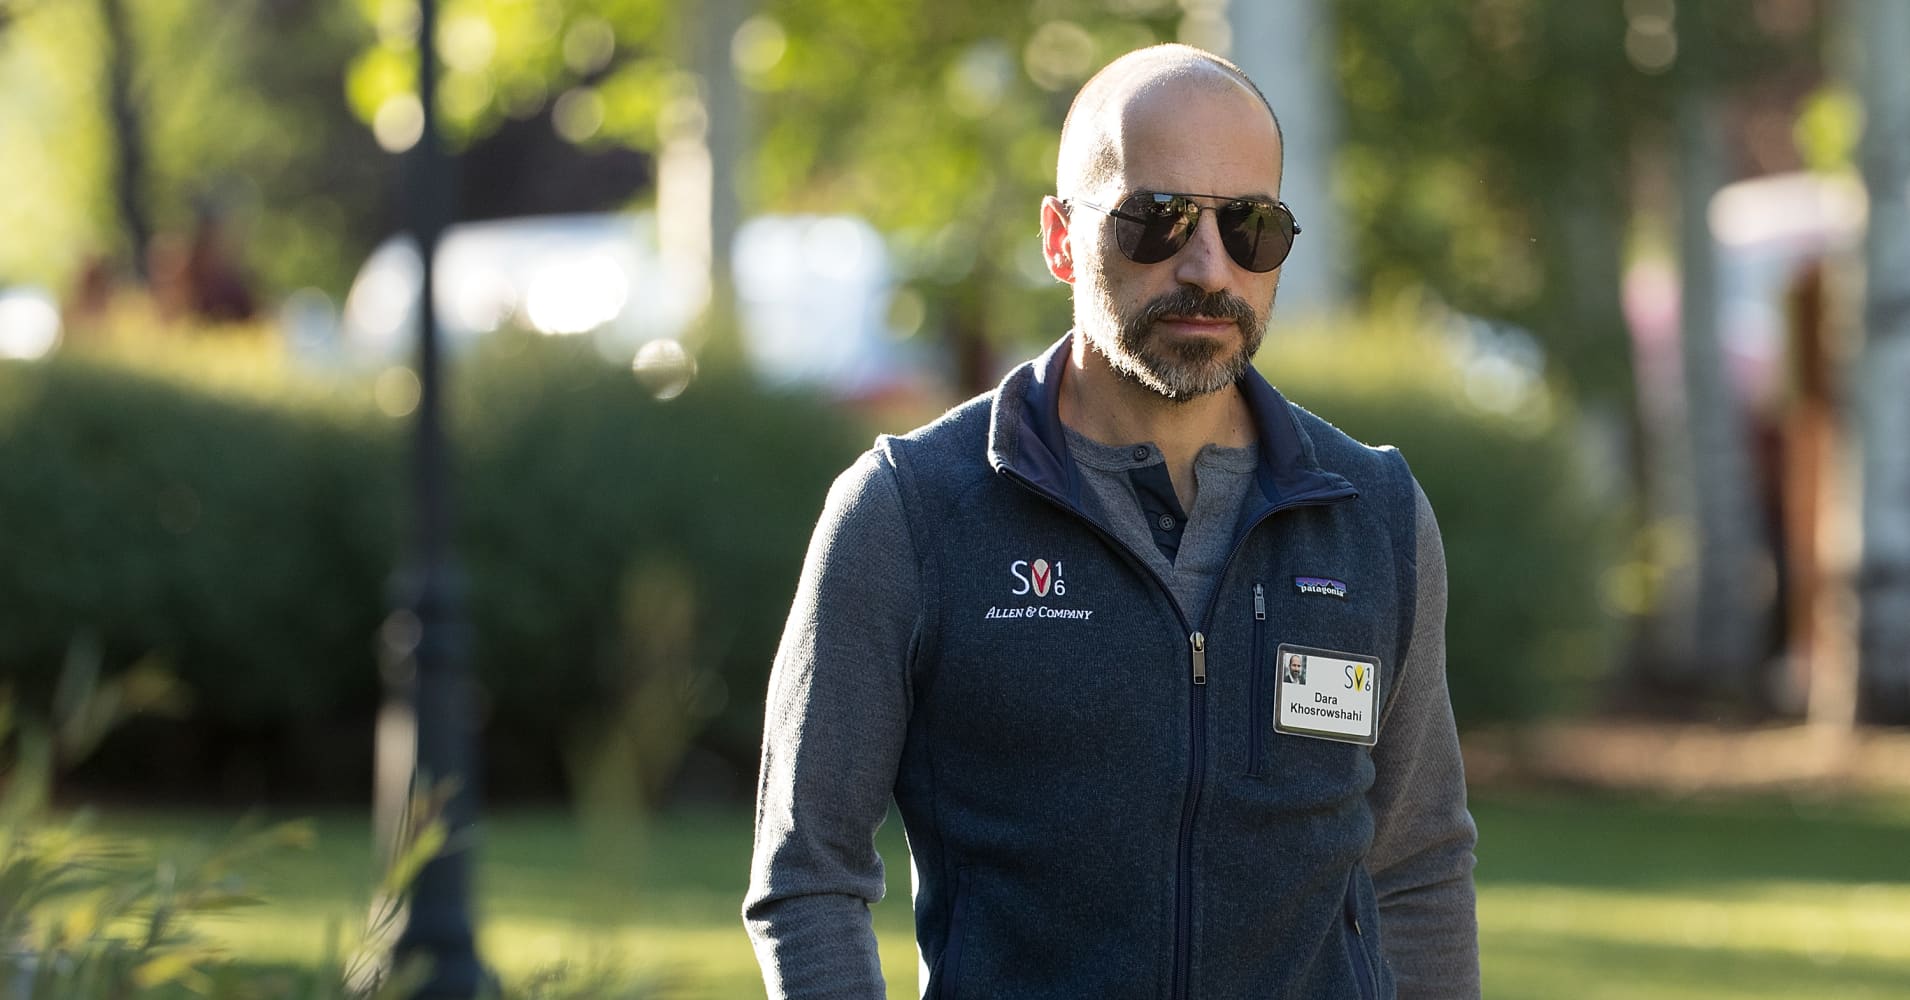 Uber is way more complicated than Lyft, and investors shouldn't value them the same way